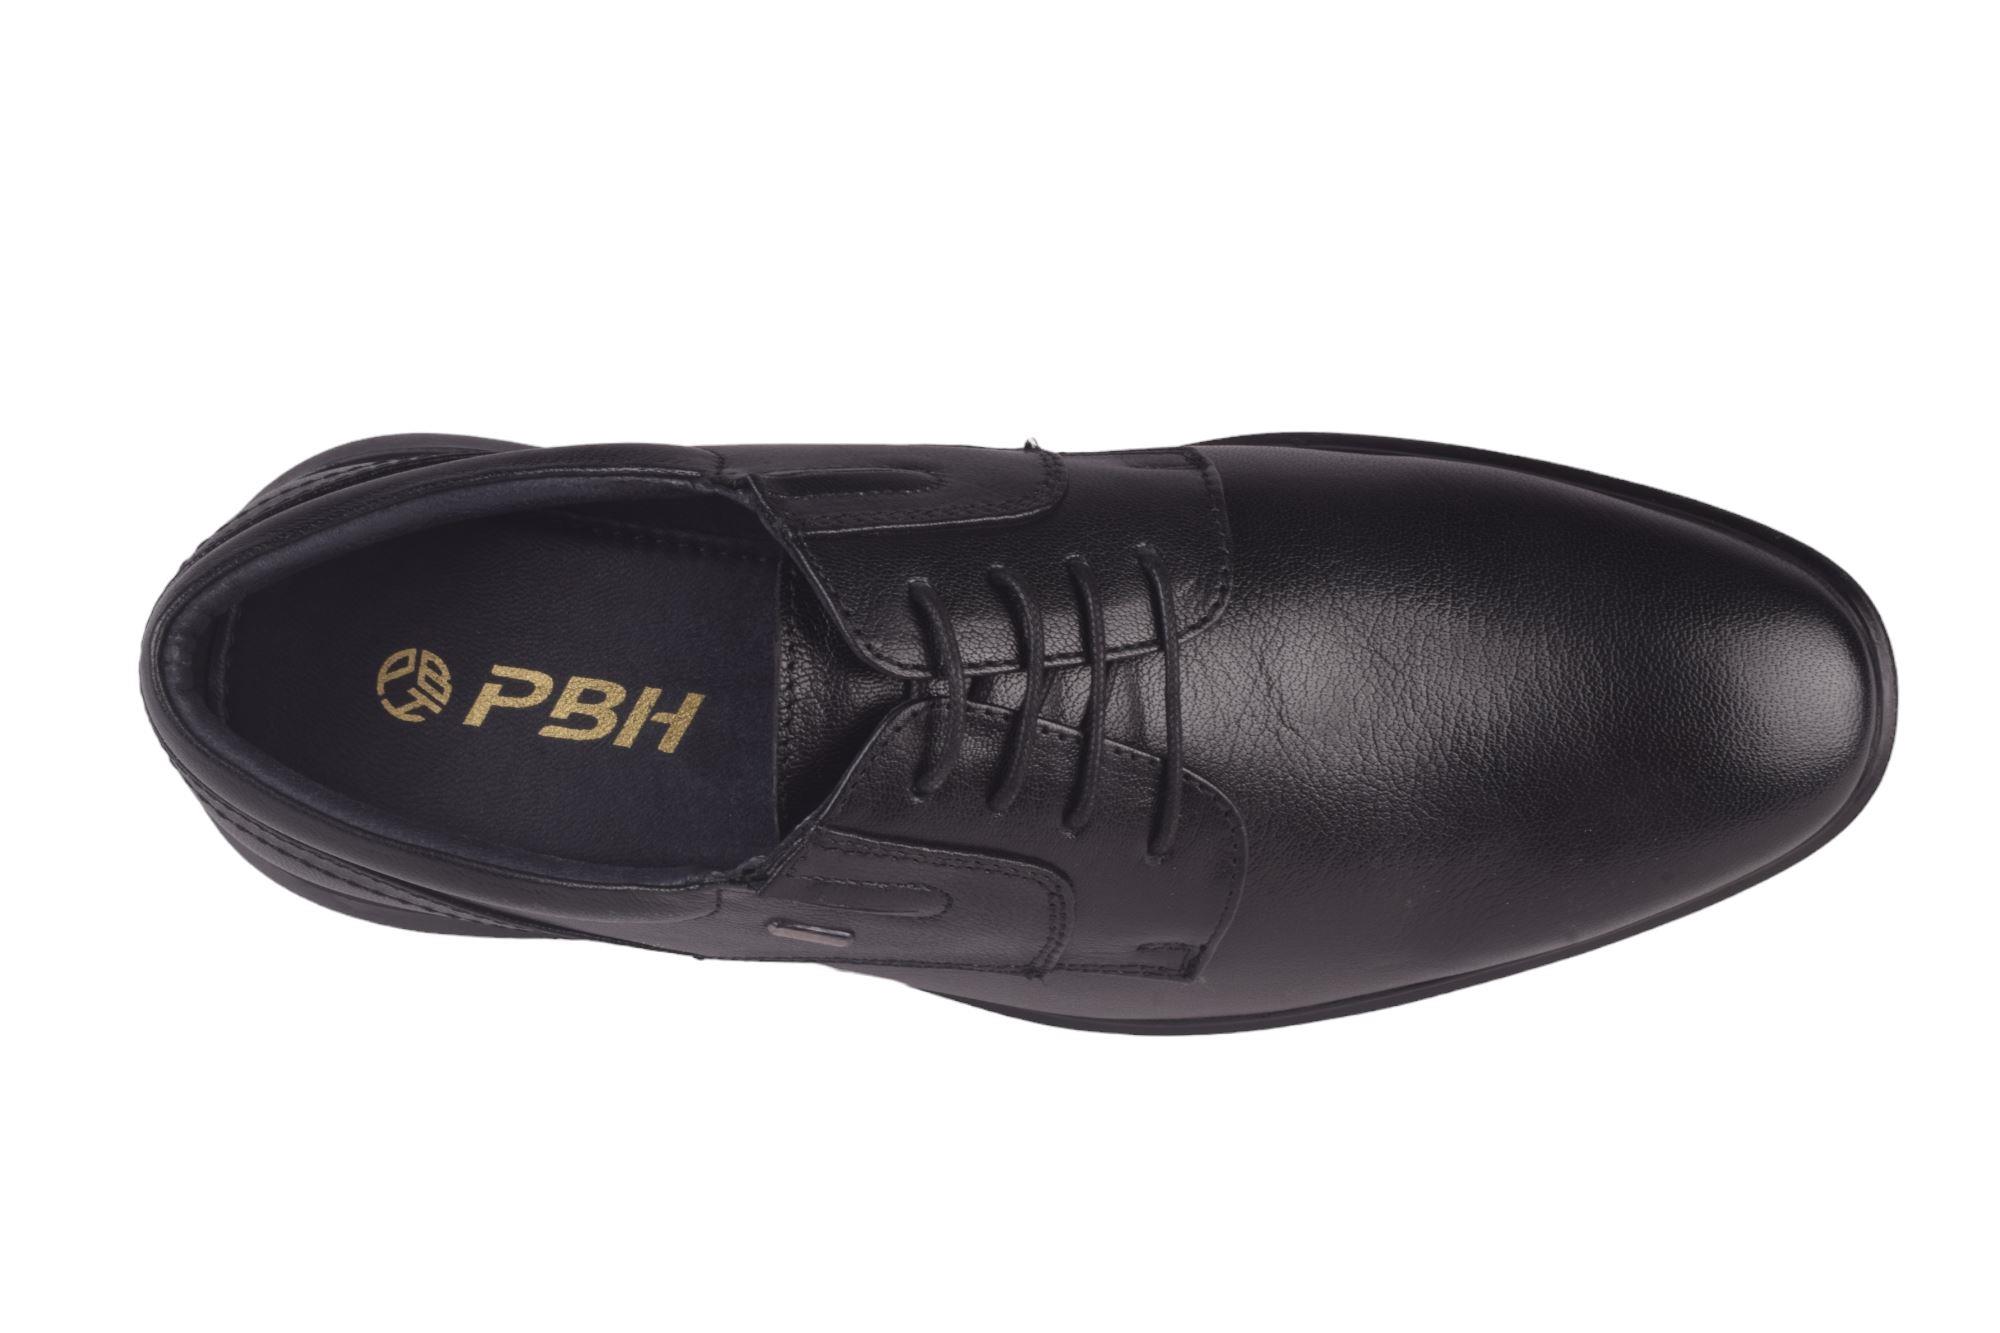 PBH BLACK DERBY SHOES ::PARMAR BOOT HOUSE | Buy Footwear and ...